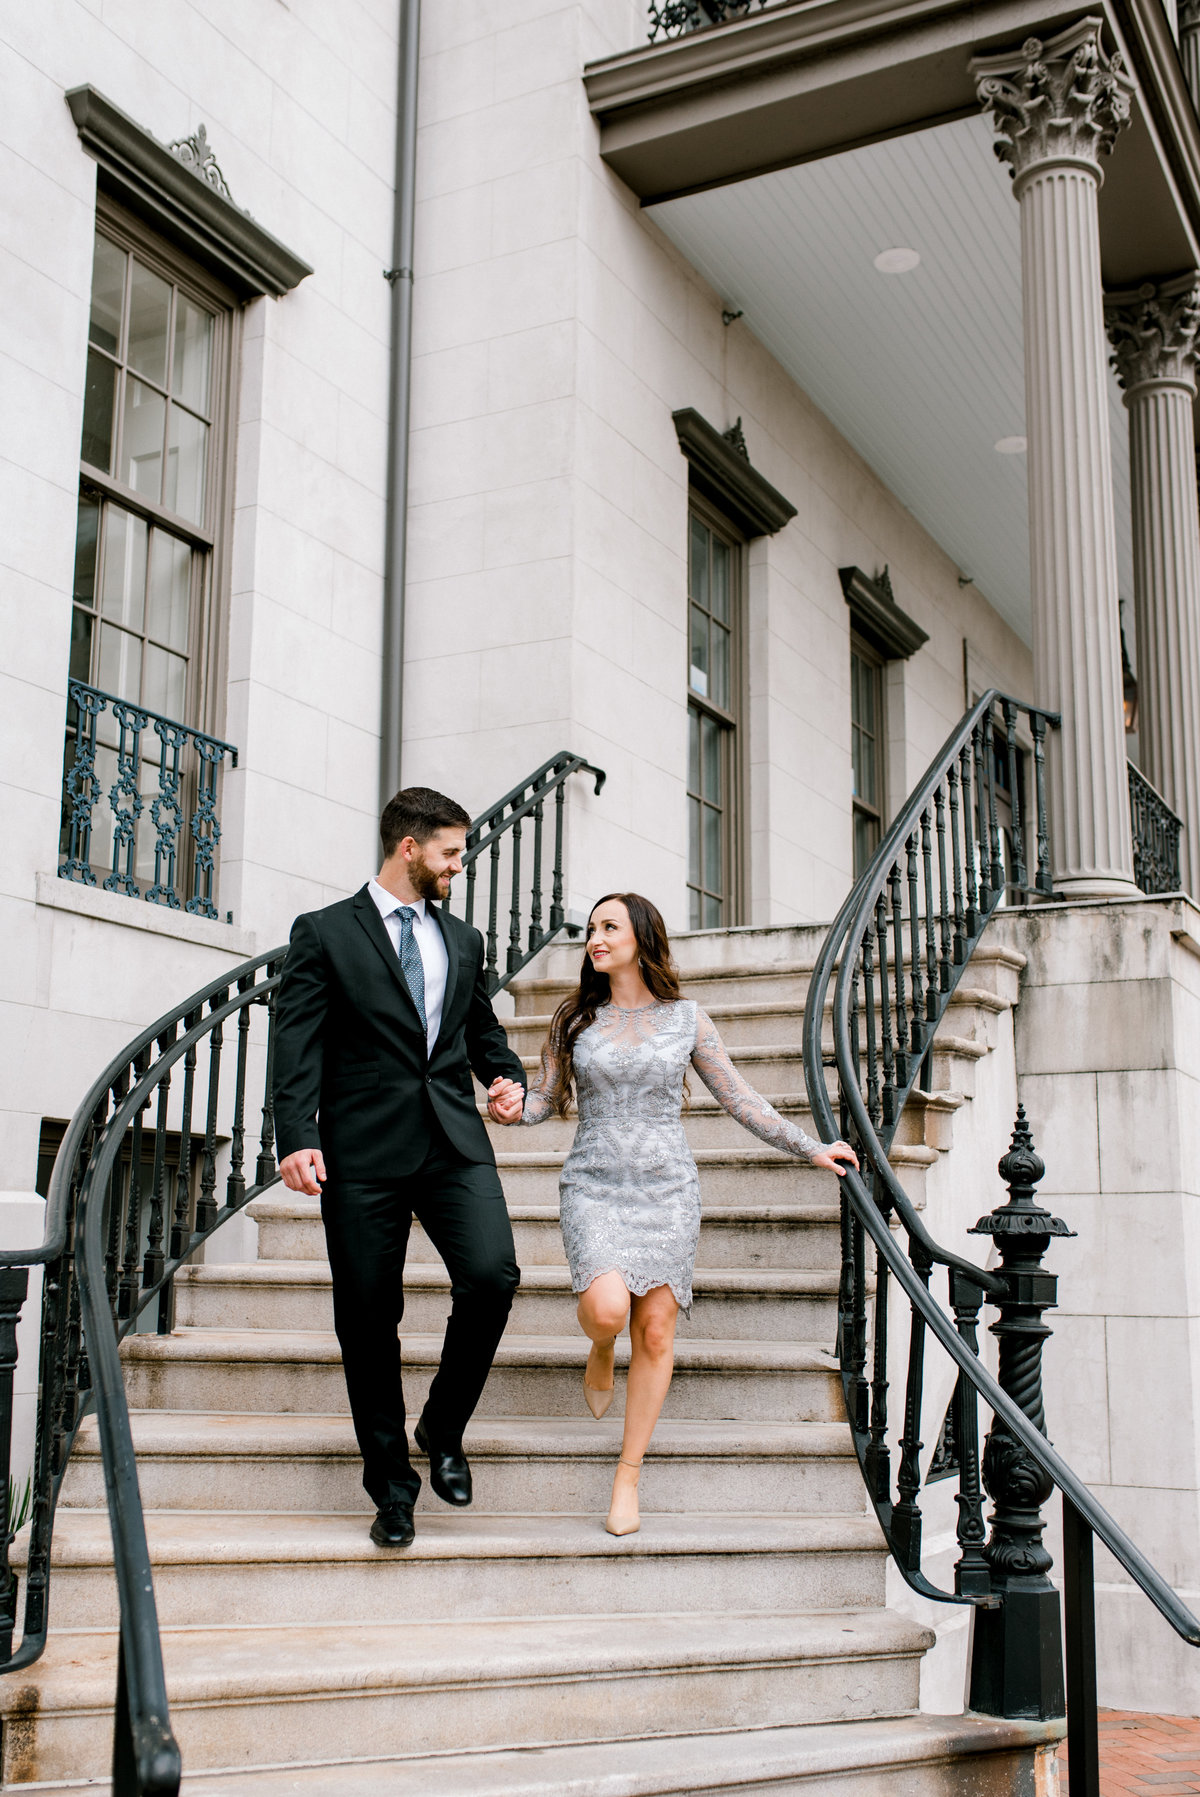 Couple walking down stairs during engagement session Savannah